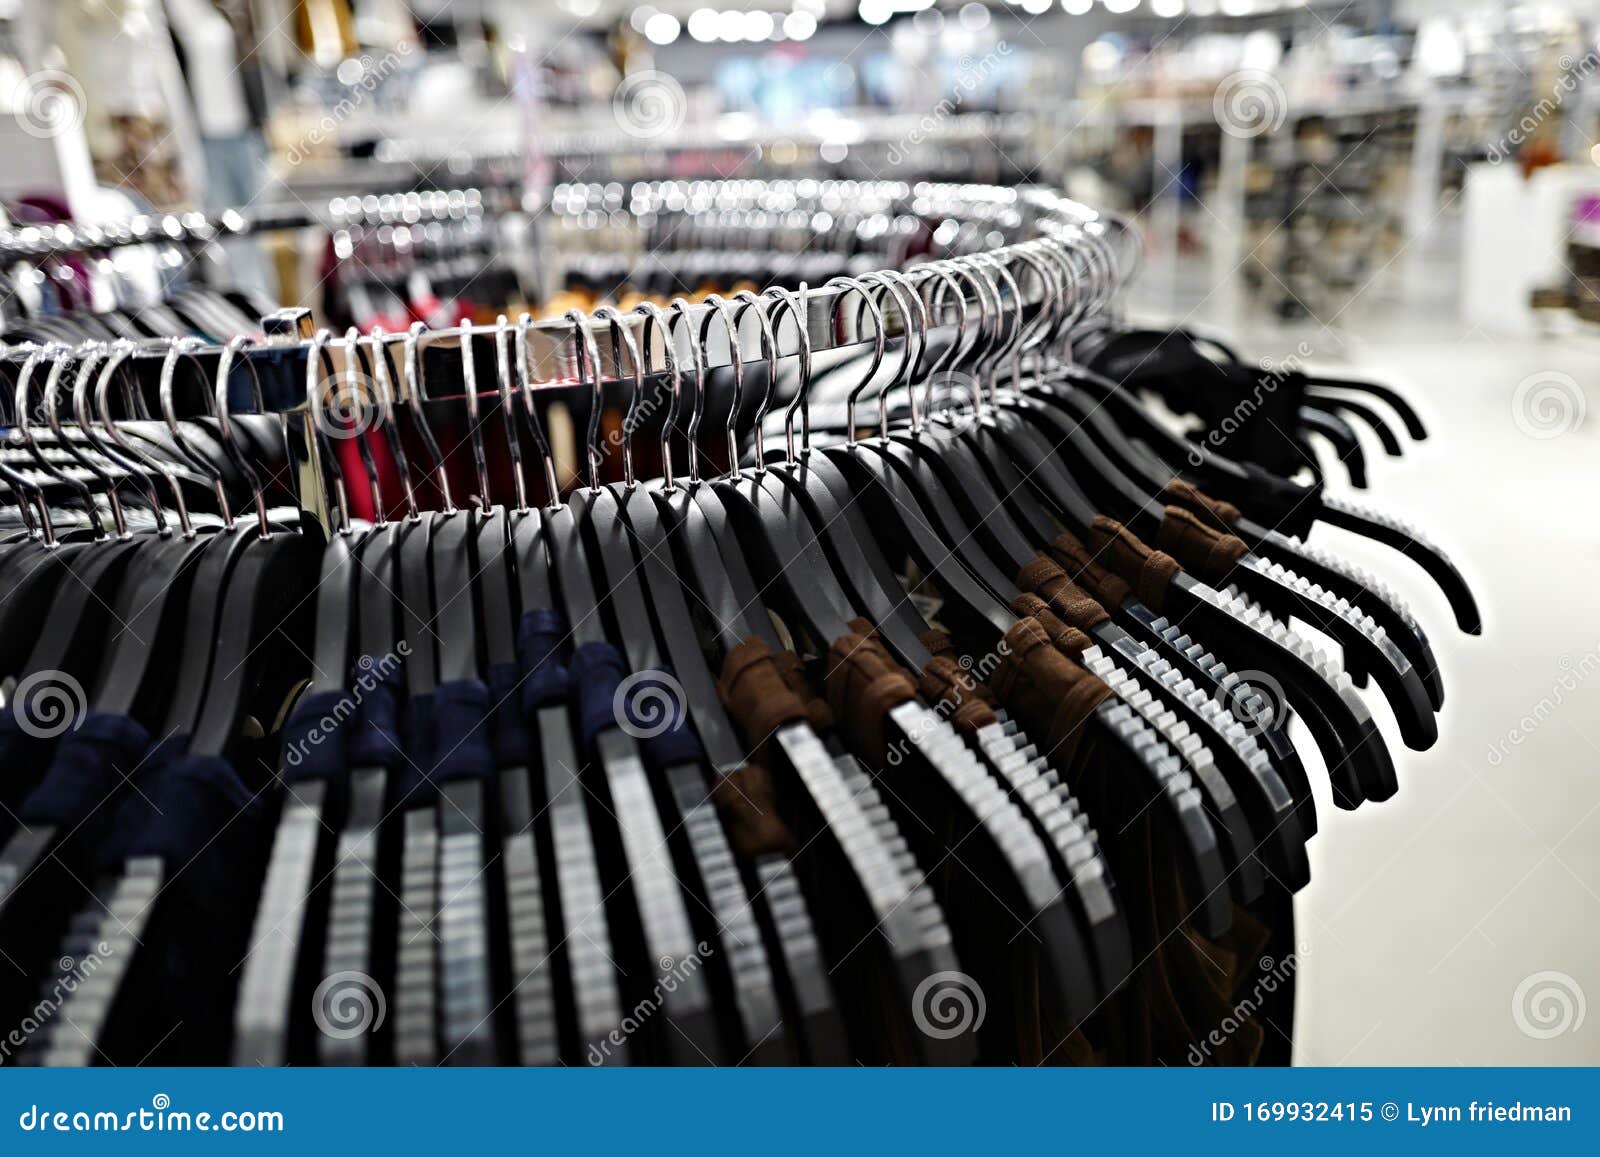 Closeup Round Rack of Clothing on Hangers in Retail Setting Stock Image ...